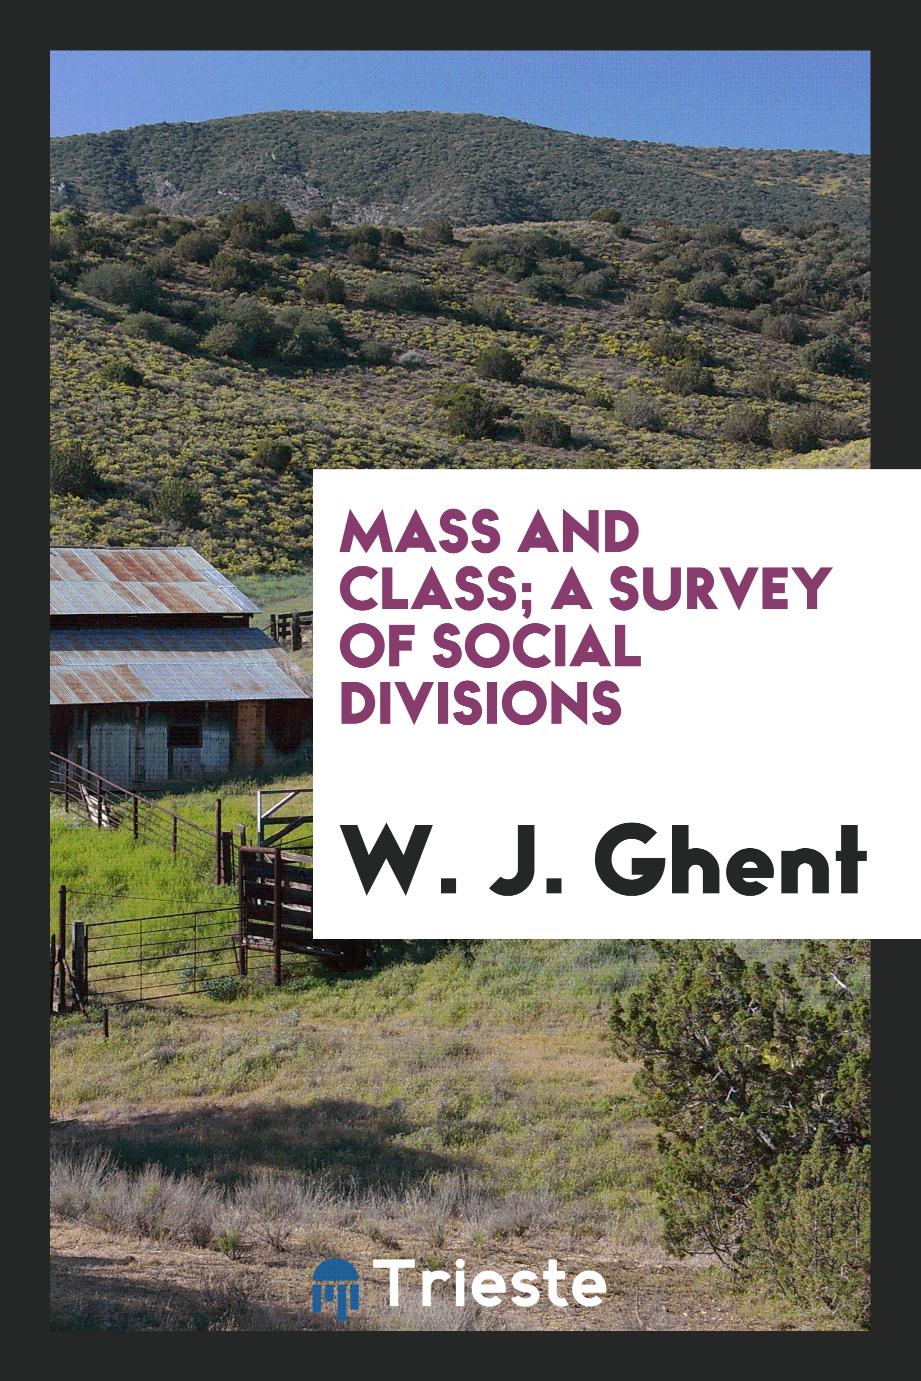 Mass and class; a survey of social divisions